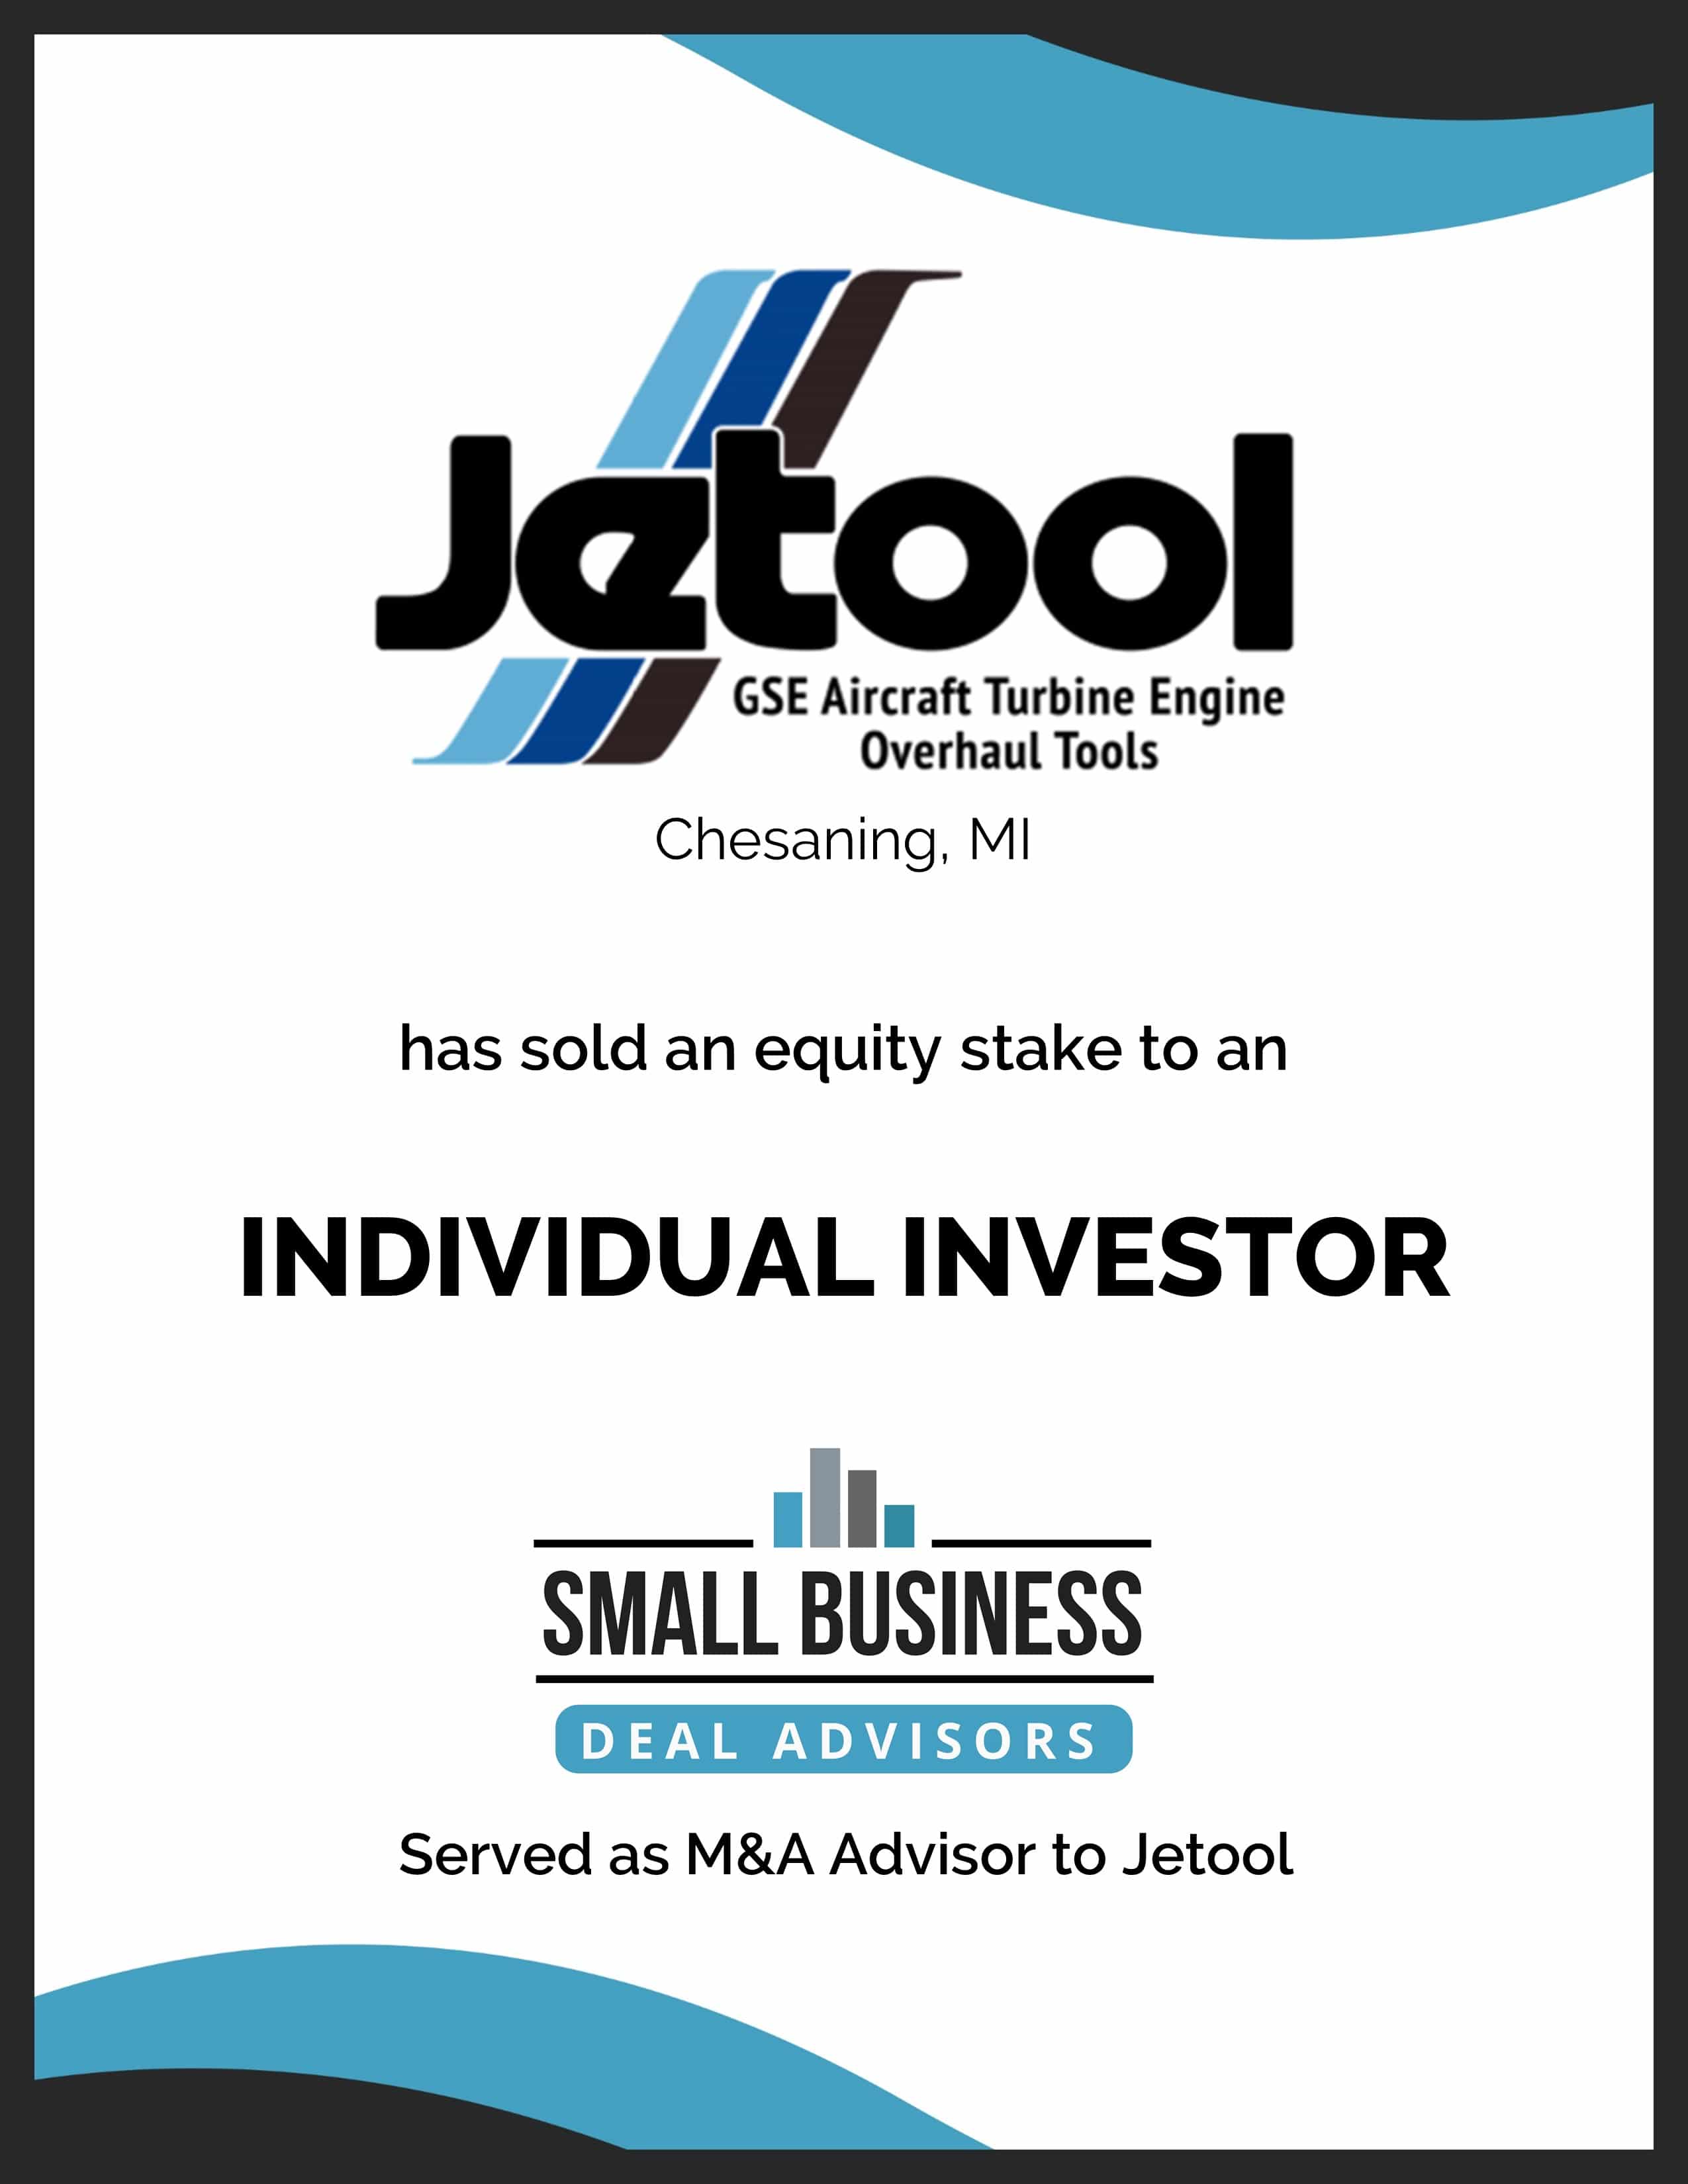 Jetool has sold an equity stake to an individual investor